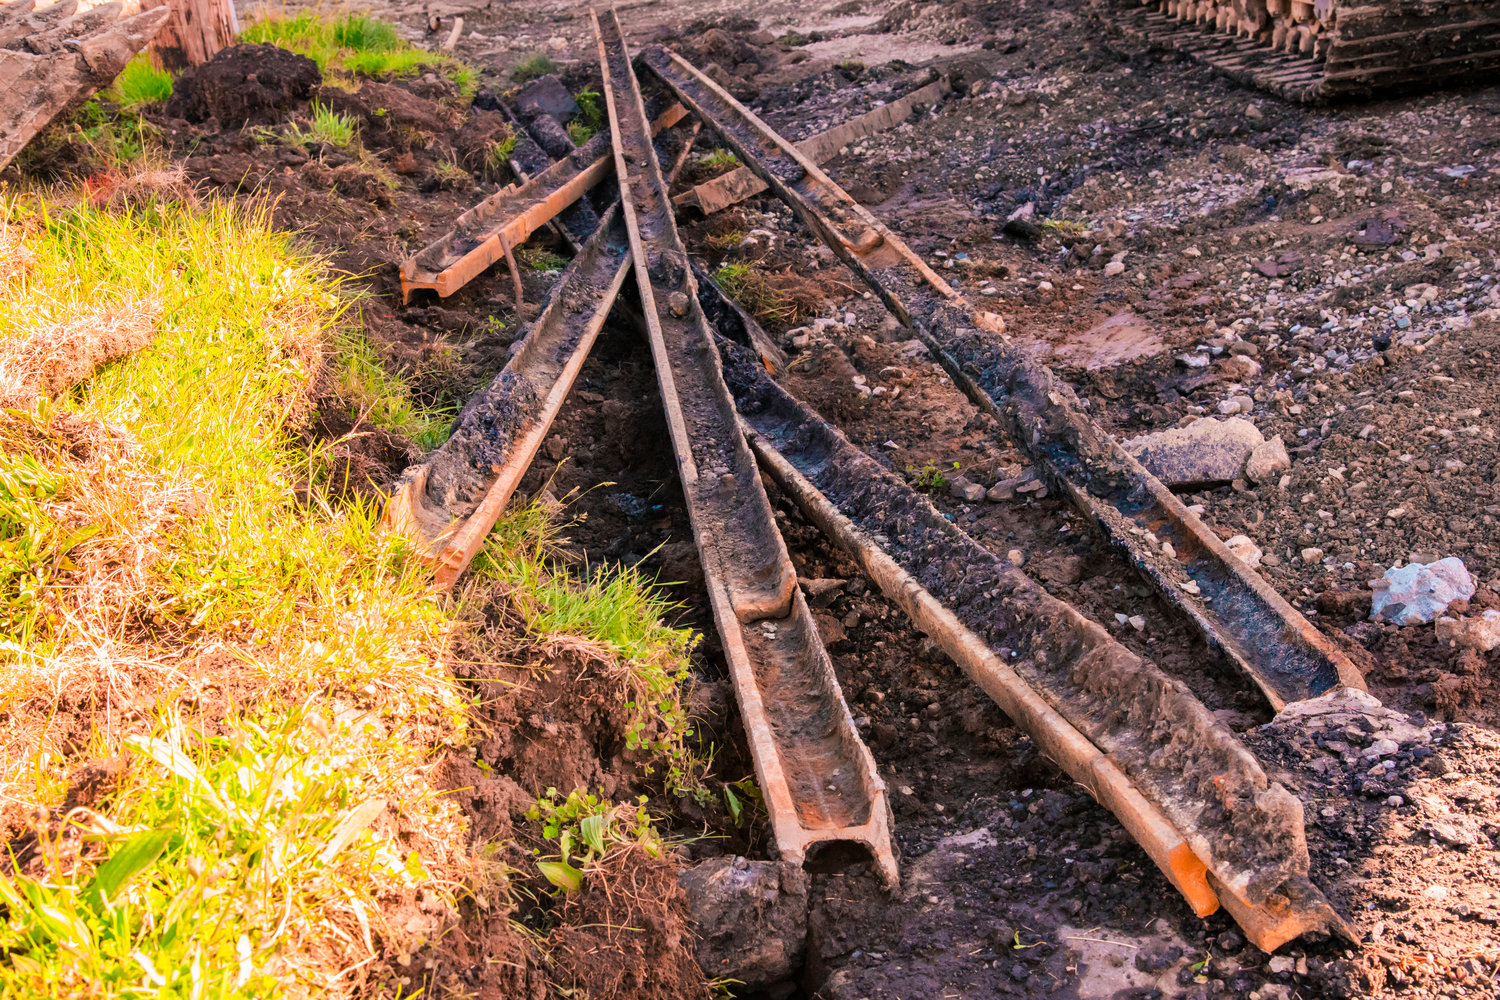 Rails from a historic streetcar route that tied the Twin Cities together are seen dug up following construction near the Lewis County Courthouse on Tuesday in Chehalis.